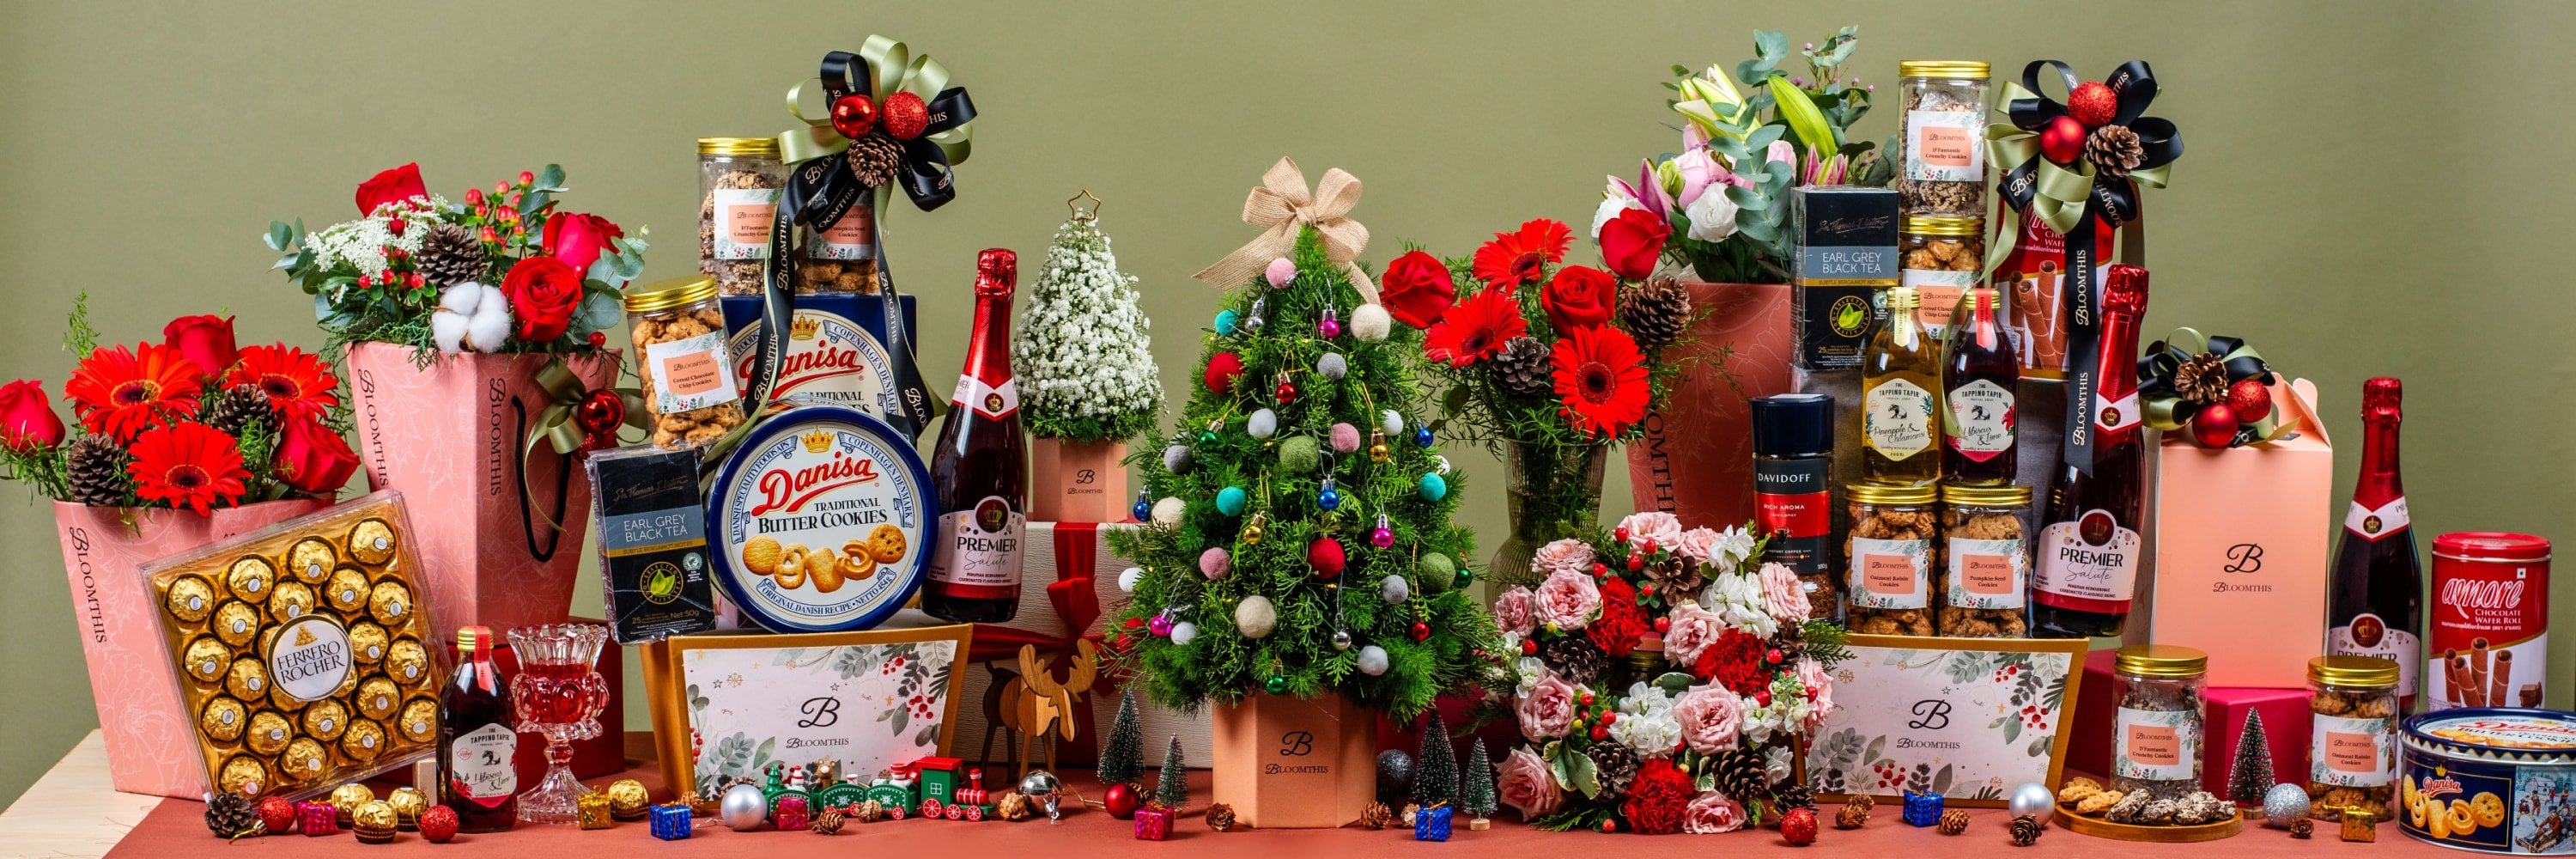 BloomThis Christmas flowers & gifts